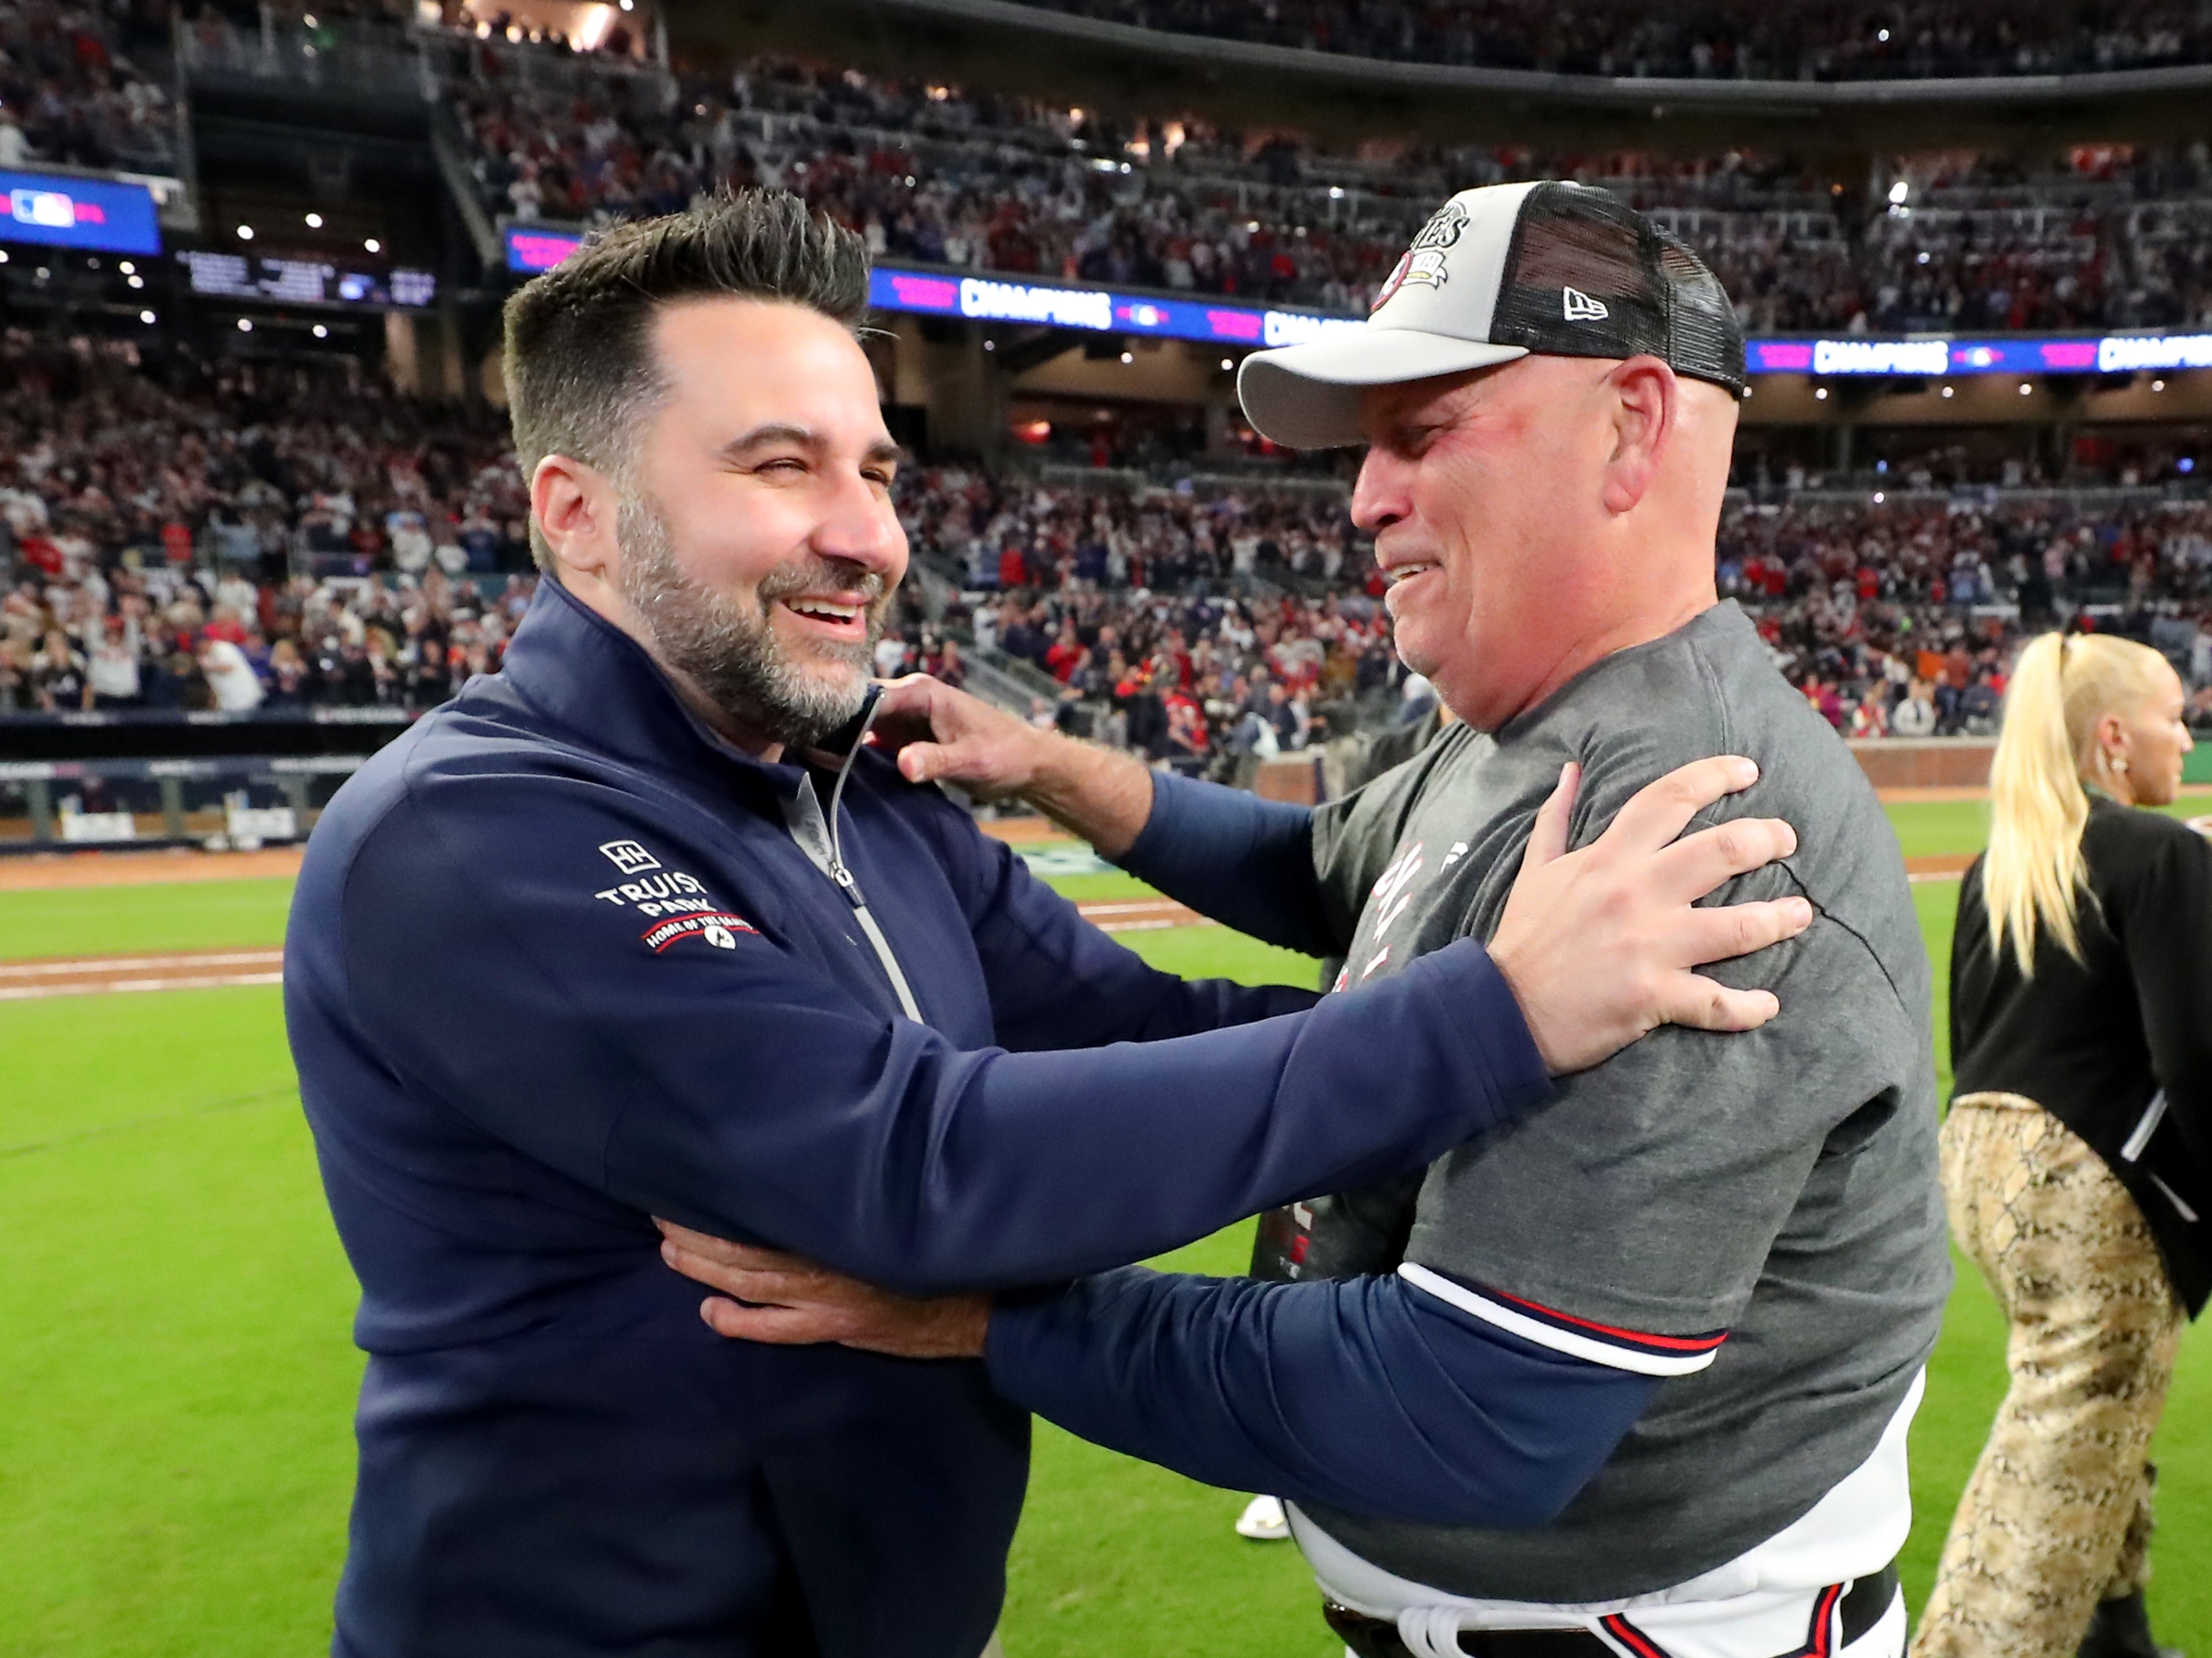 How Braves GM Alex Anthopoulos became one of the top executives in baseball